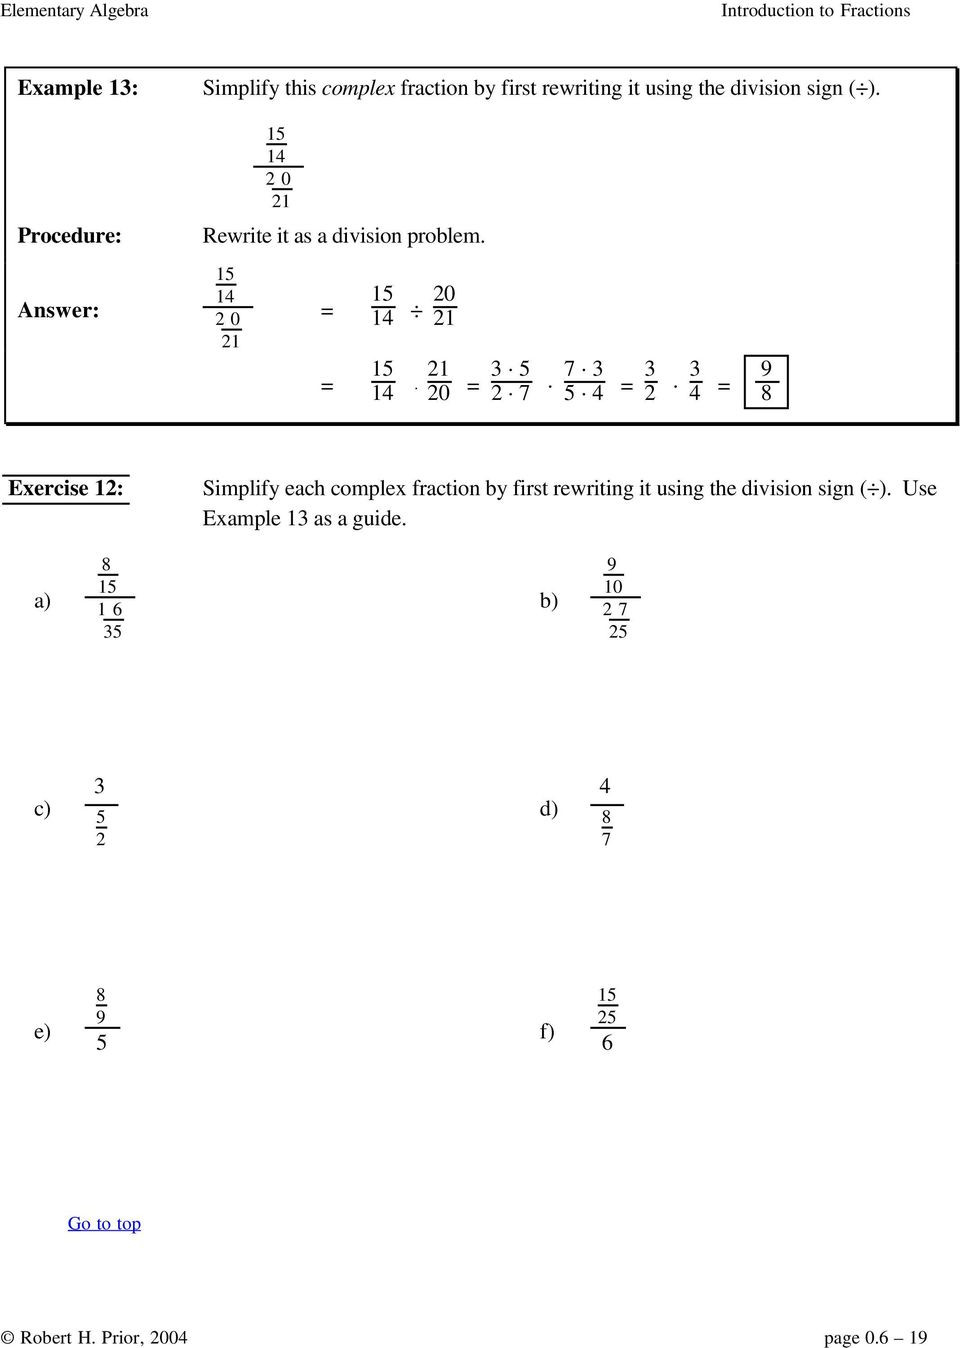 Simplifying Complex Fractions Worksheet Introduction to Fractions Pdf Free Download